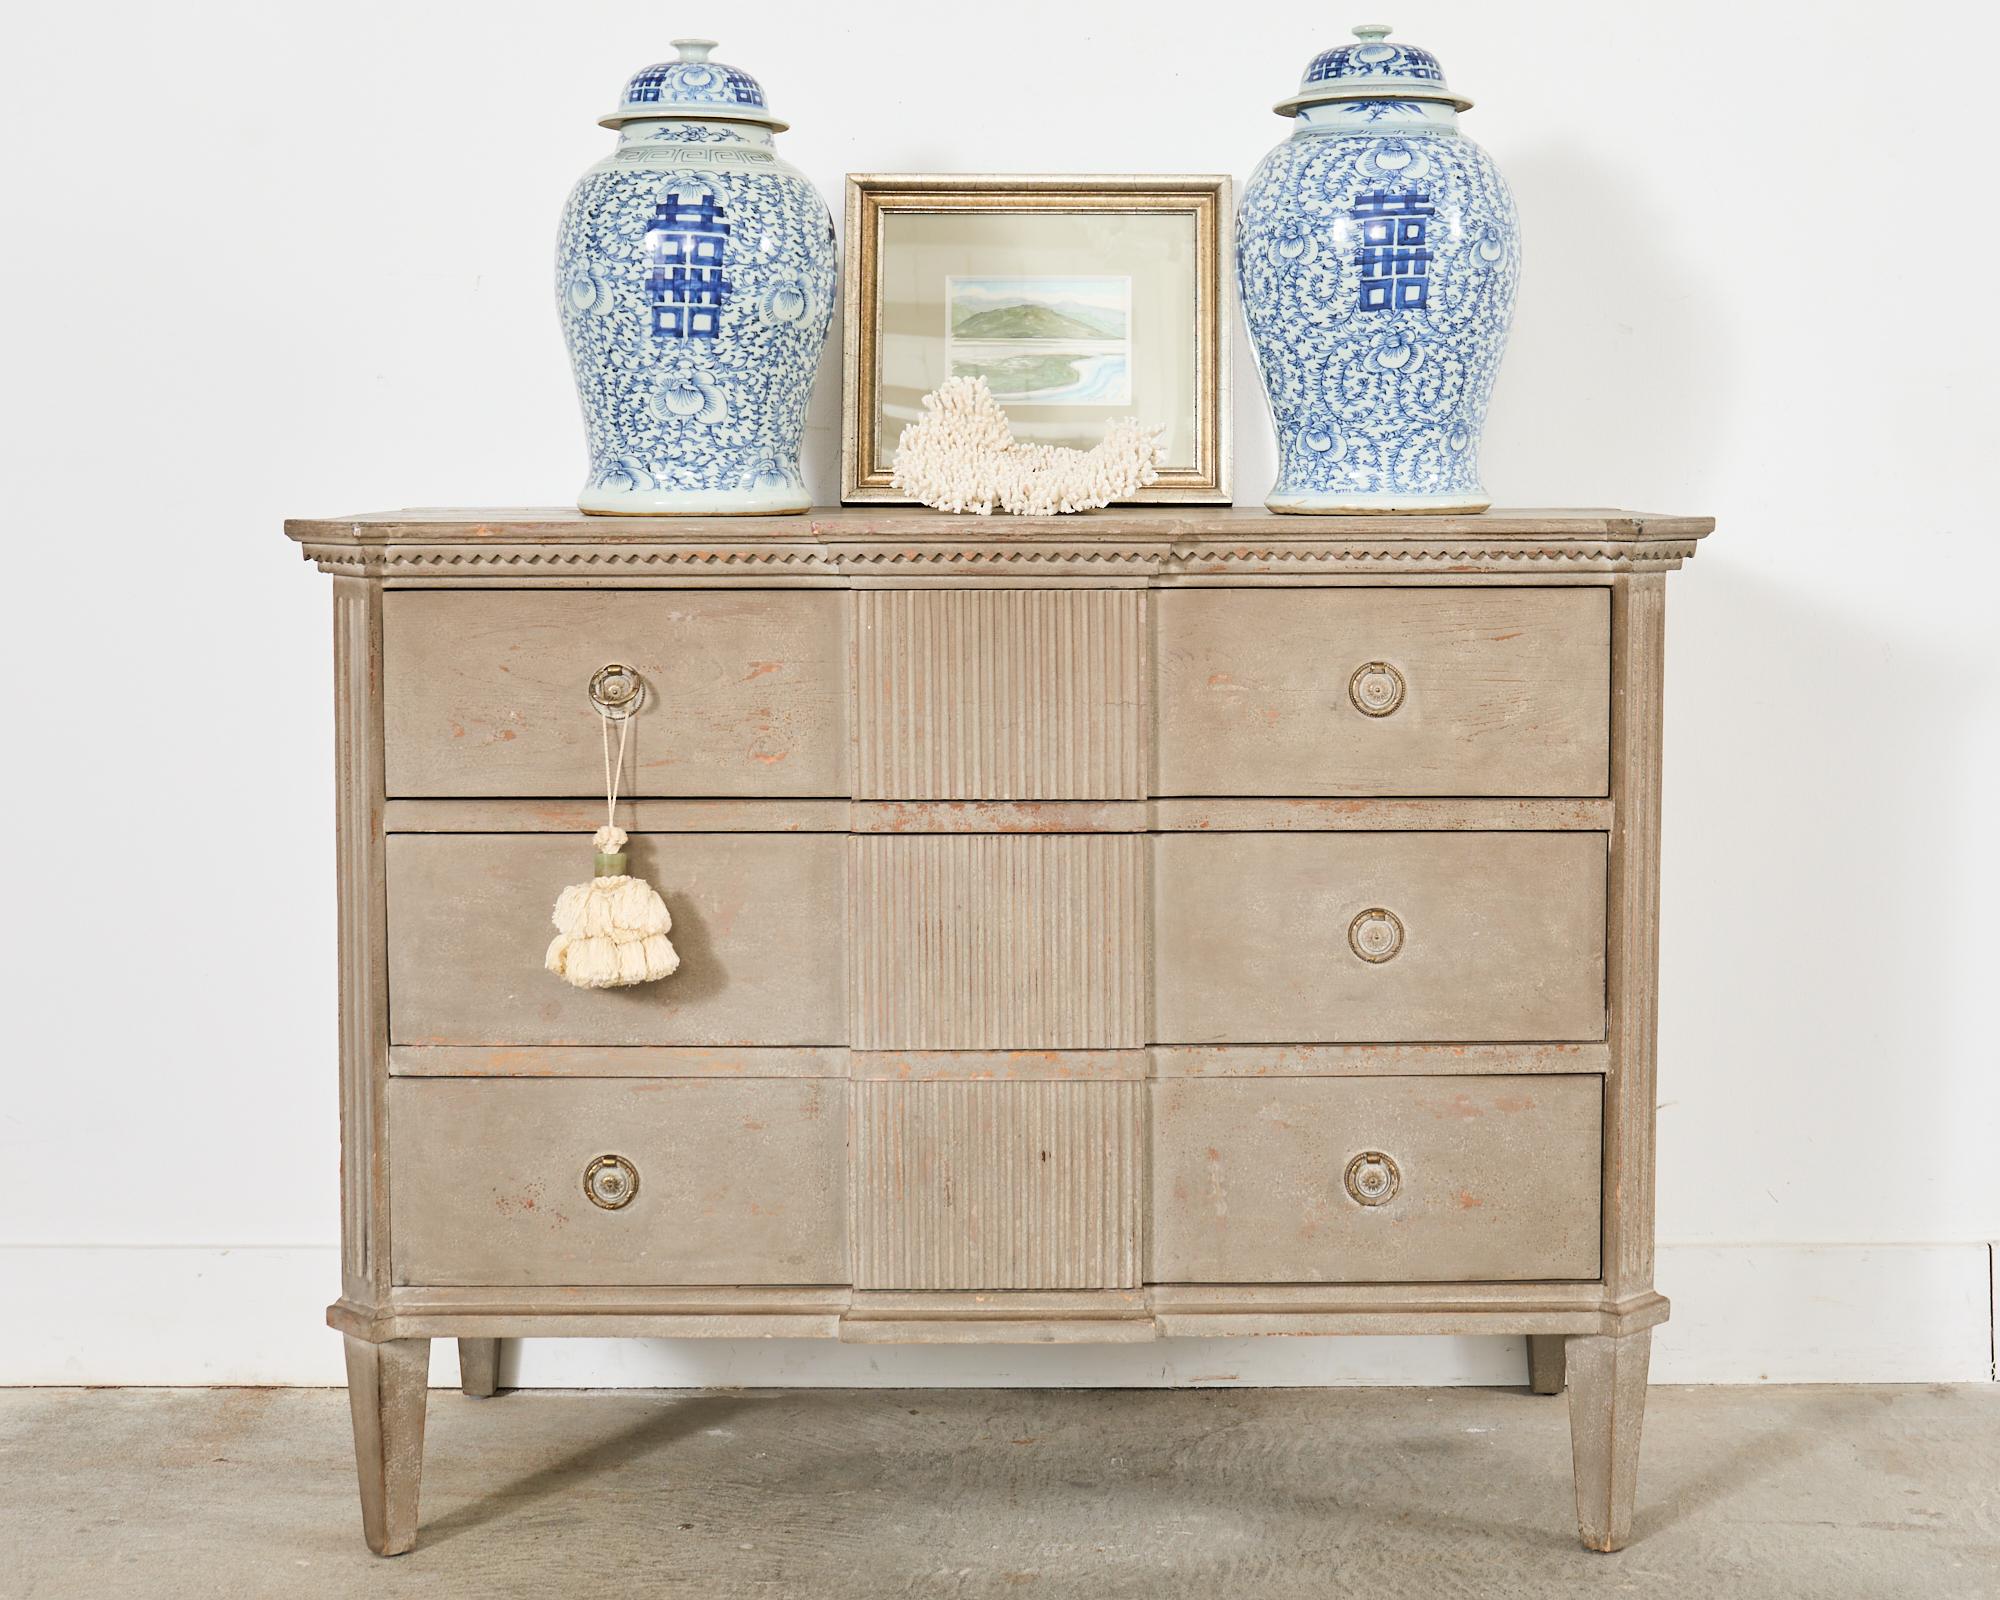 Divine pair of cerused commodes or chests of drawers made in the Swedish Gustavian taste. The large chests feature pilaster column reeded corners. The three drawer cases are centered by a large reeded column motif with a conforming top in the